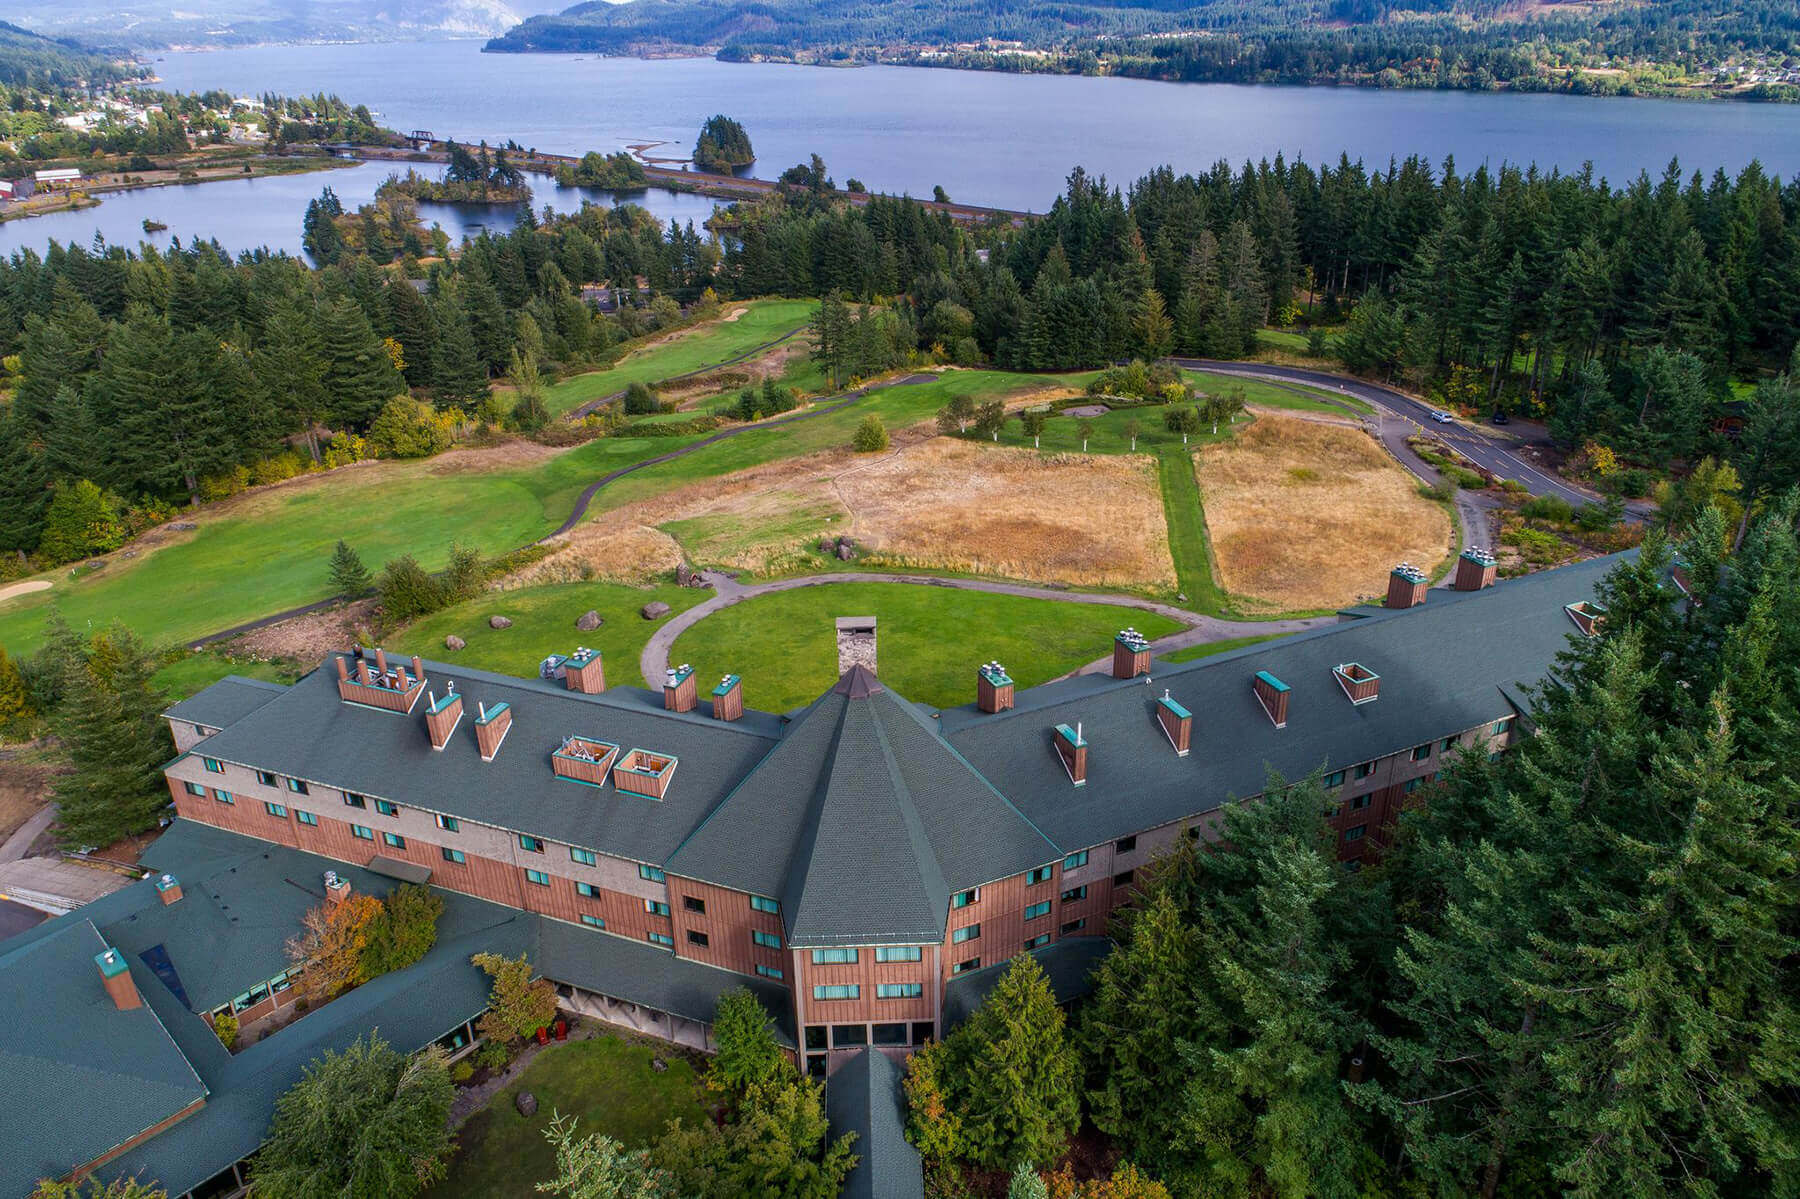 Birds' eye view at Skamania Lodge in the Columbia River Gorge. 